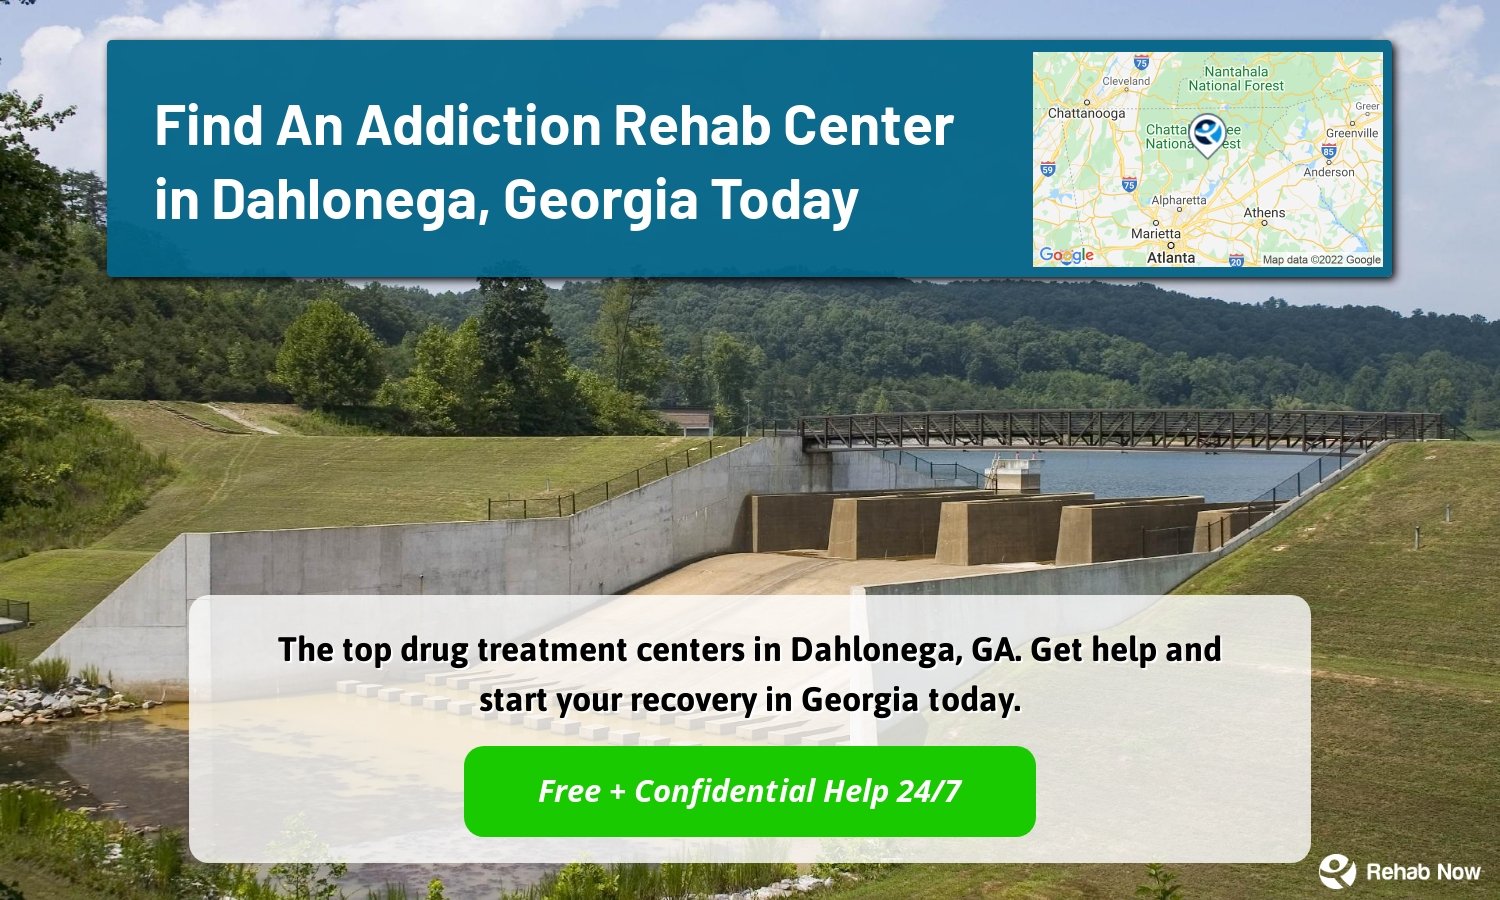 The top drug treatment centers in Dahlonega, GA. Get help and start your recovery in Georgia today.